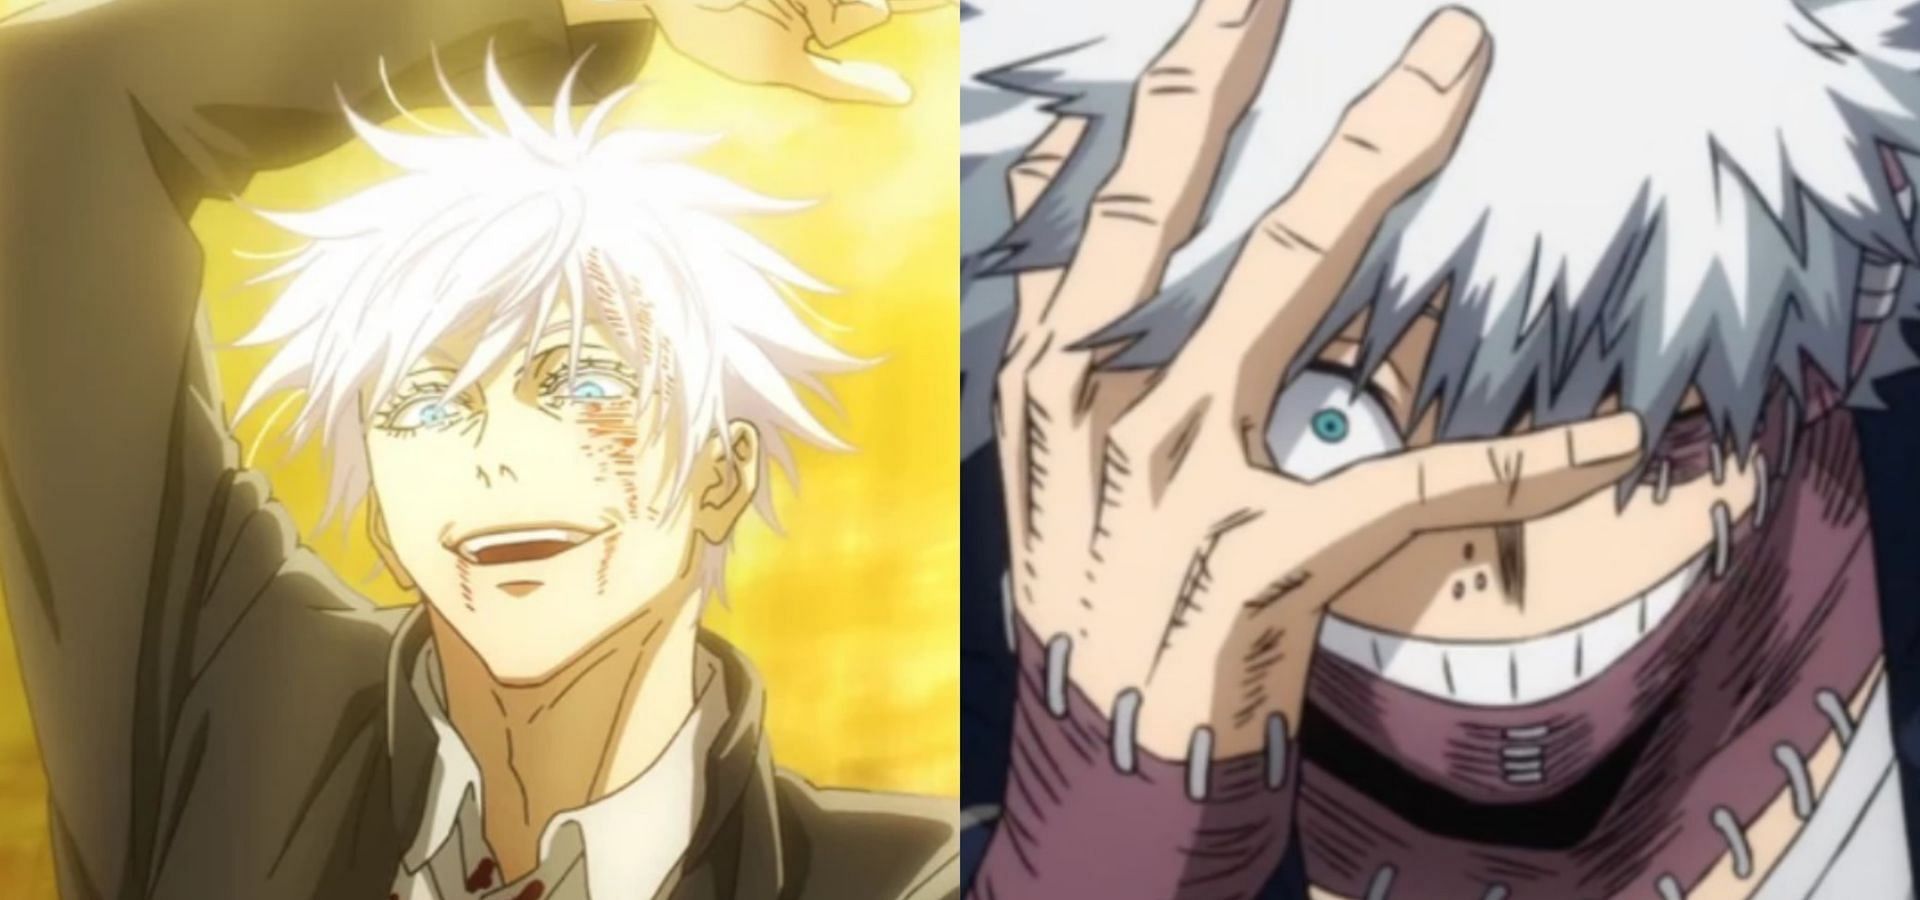 White-haired anime characters with the most tragic fates (Image via Mappa, Bones)